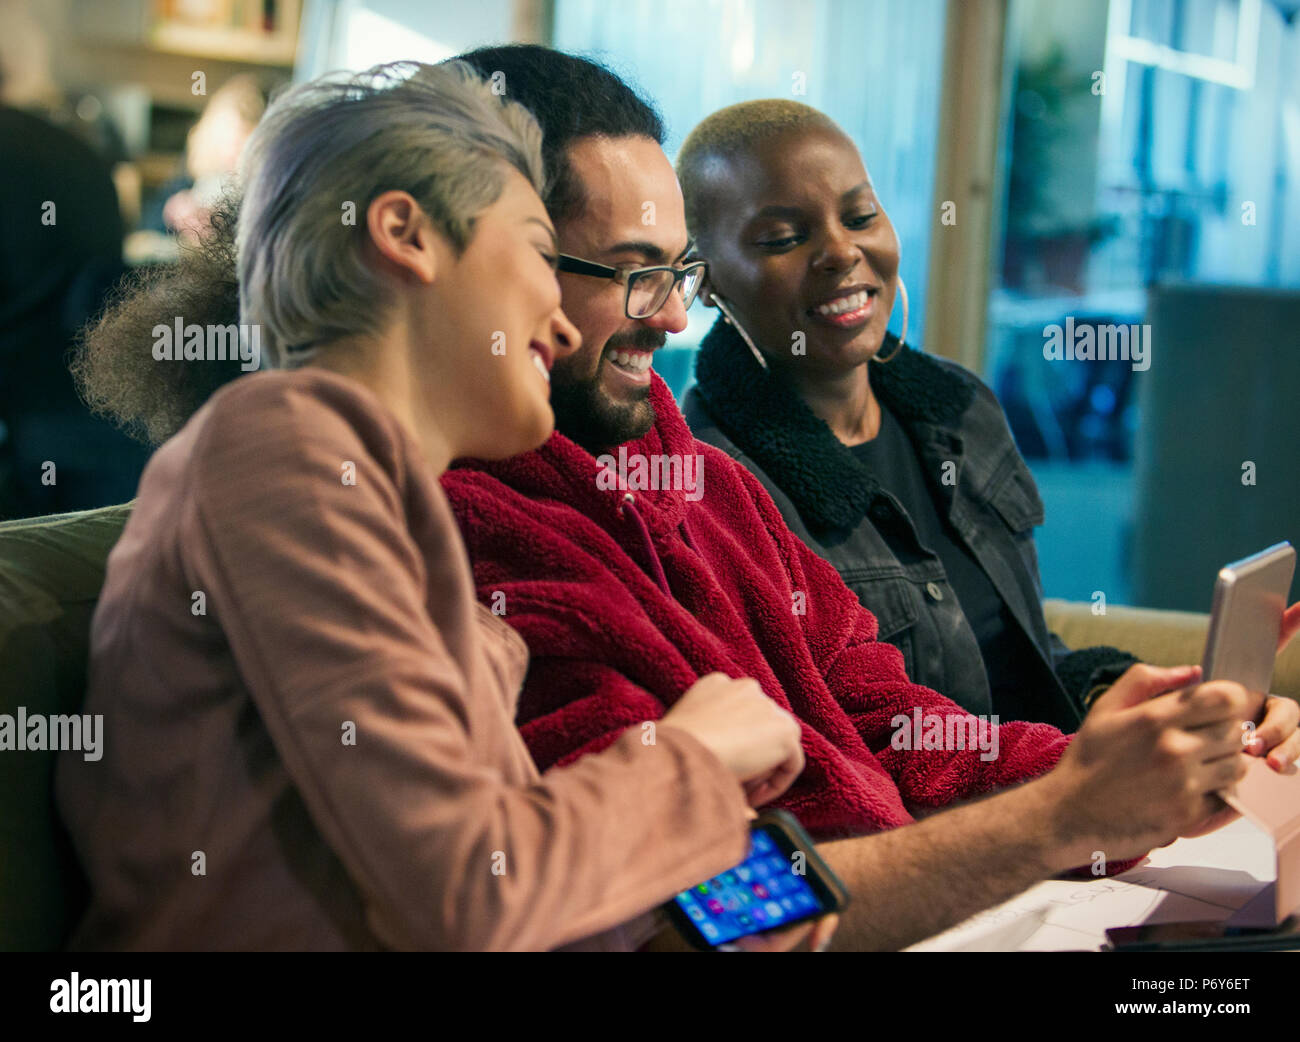 Creative business people using digital tablet Stock Photo